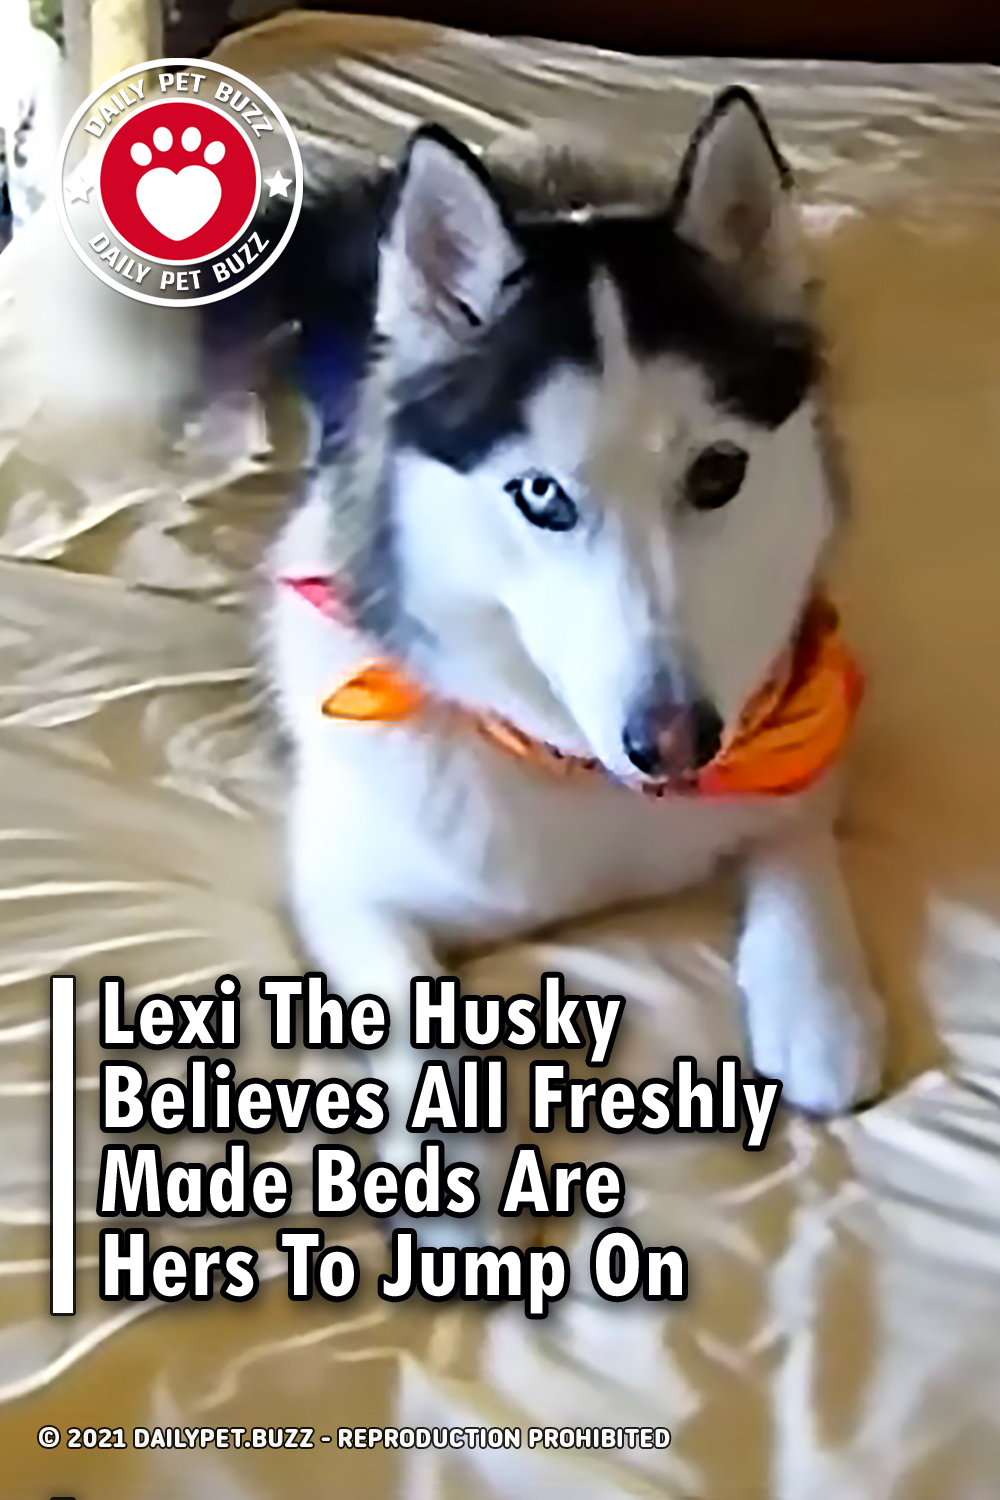 Lexi The Husky Believes All Freshly Made Beds Are Hers To Jump On